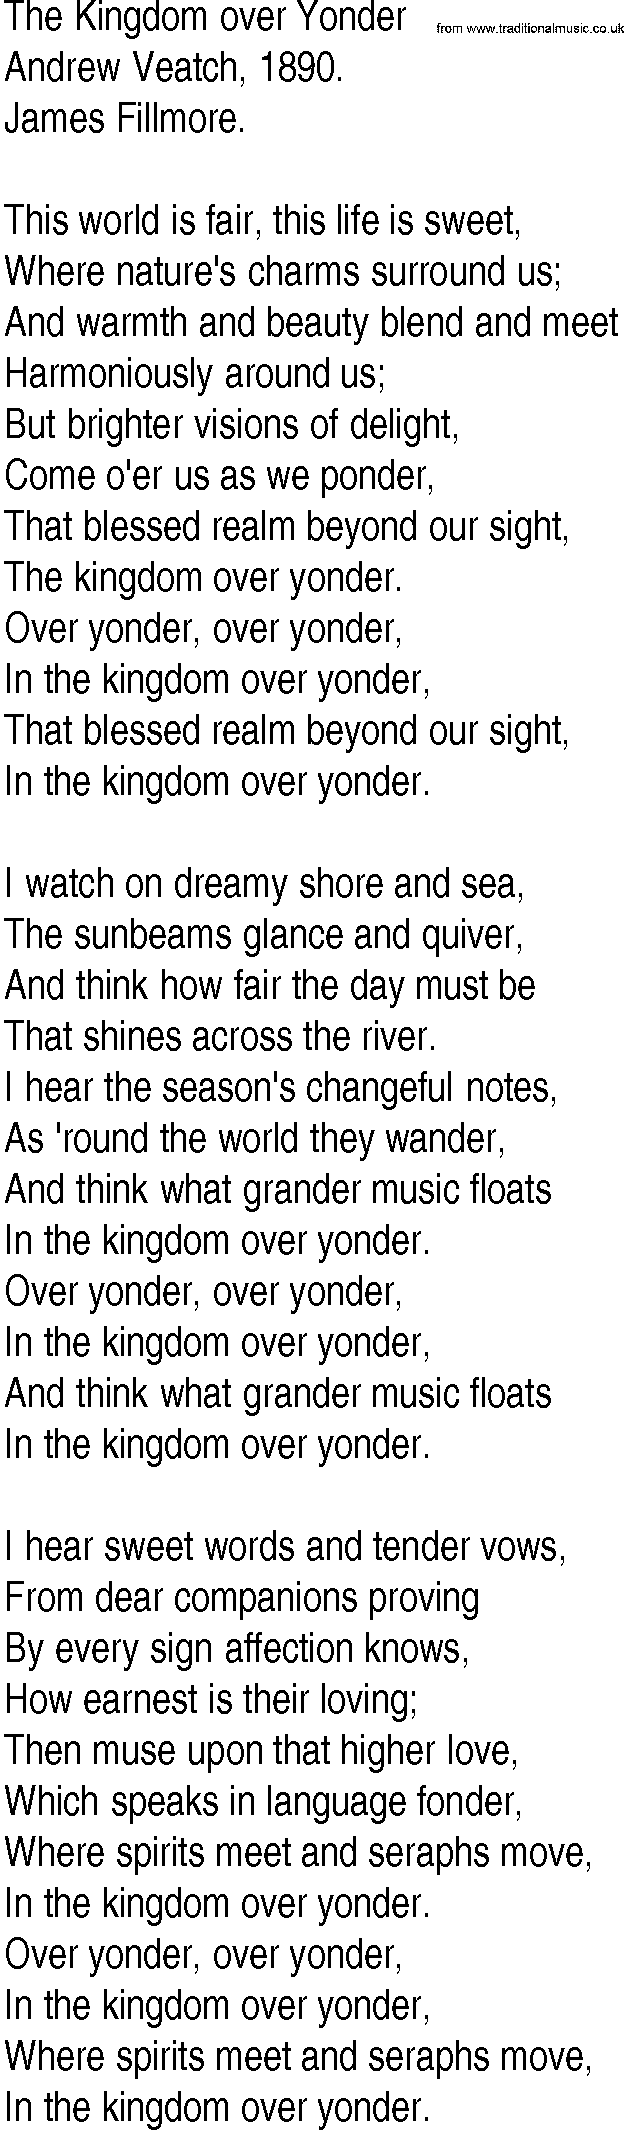 Hymn and Gospel Song: The Kingdom over Yonder by Andrew Veatch lyrics